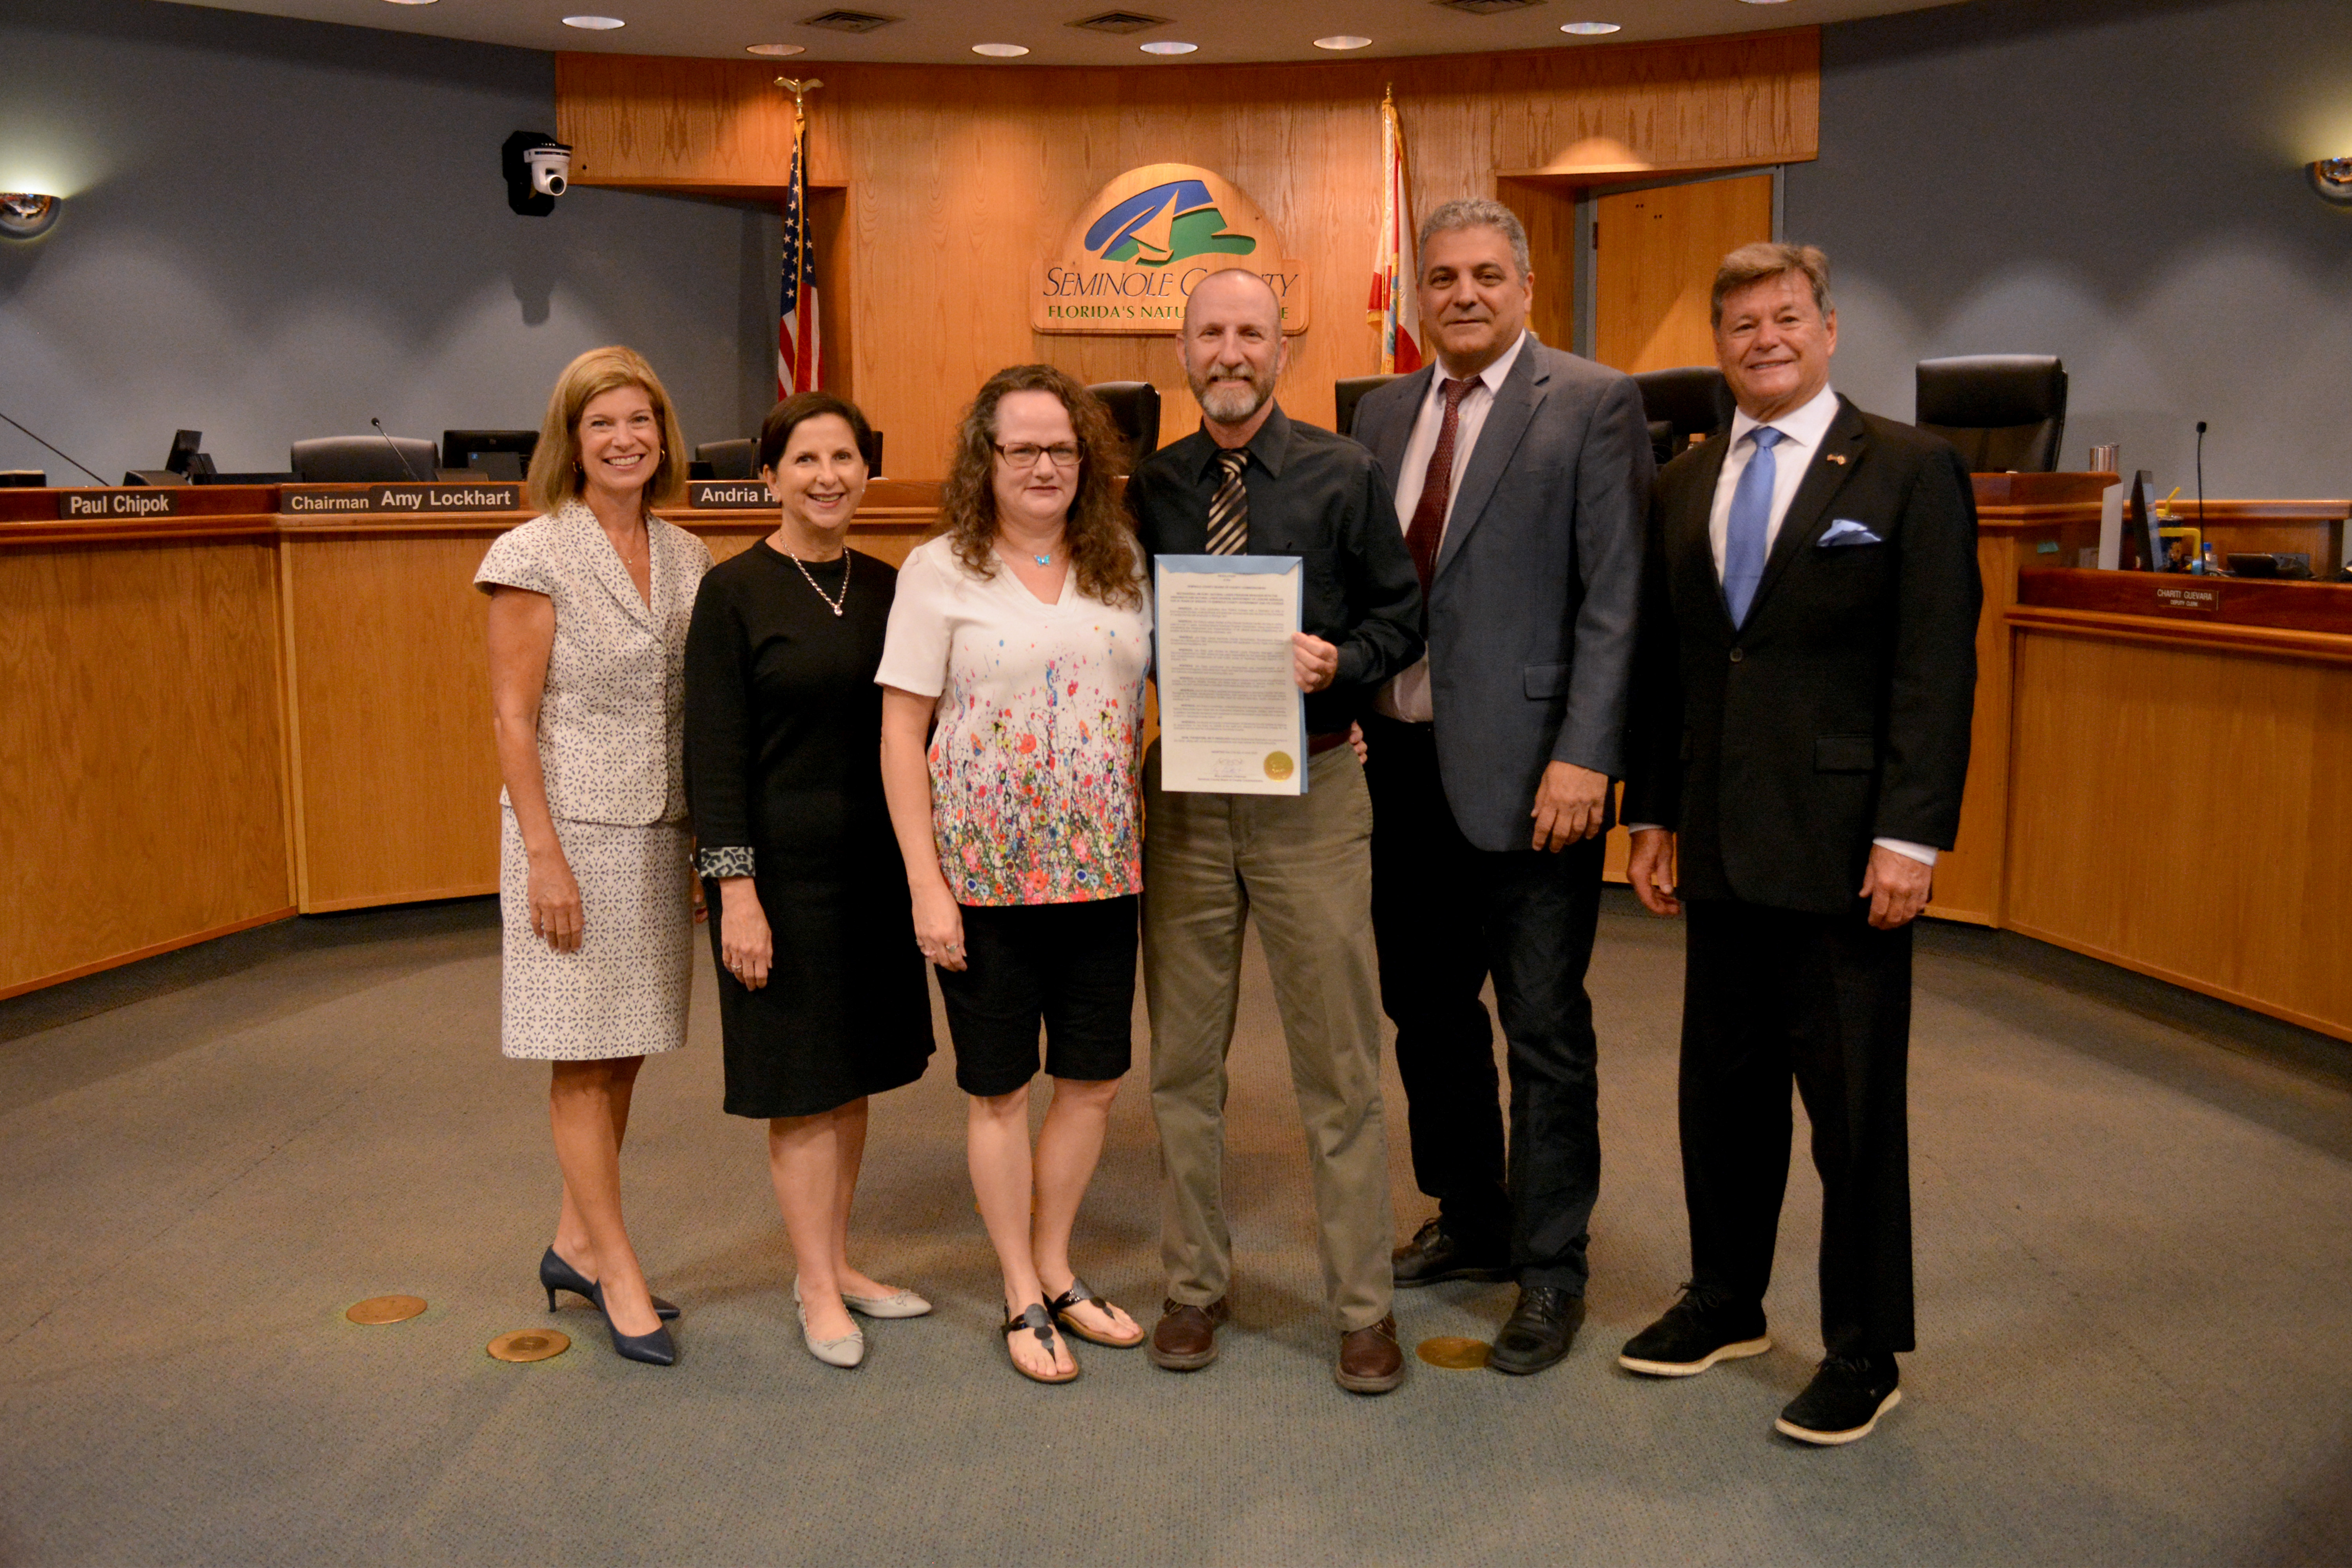 Resolution - Recognizing Jim Duby, Natural Lands Program Manager, for 30 Years of Service to Seminole County and Its Citizens